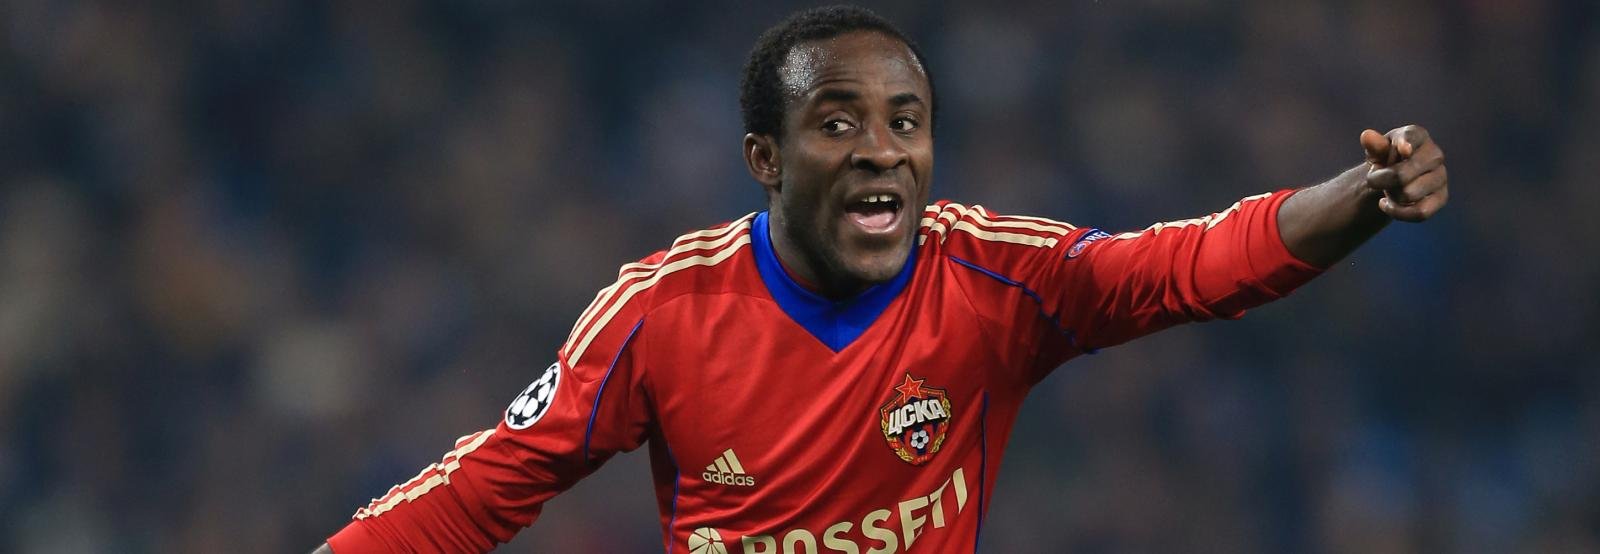 Newcastle United seal fourth January signing with Seydou Doumbia loan deal